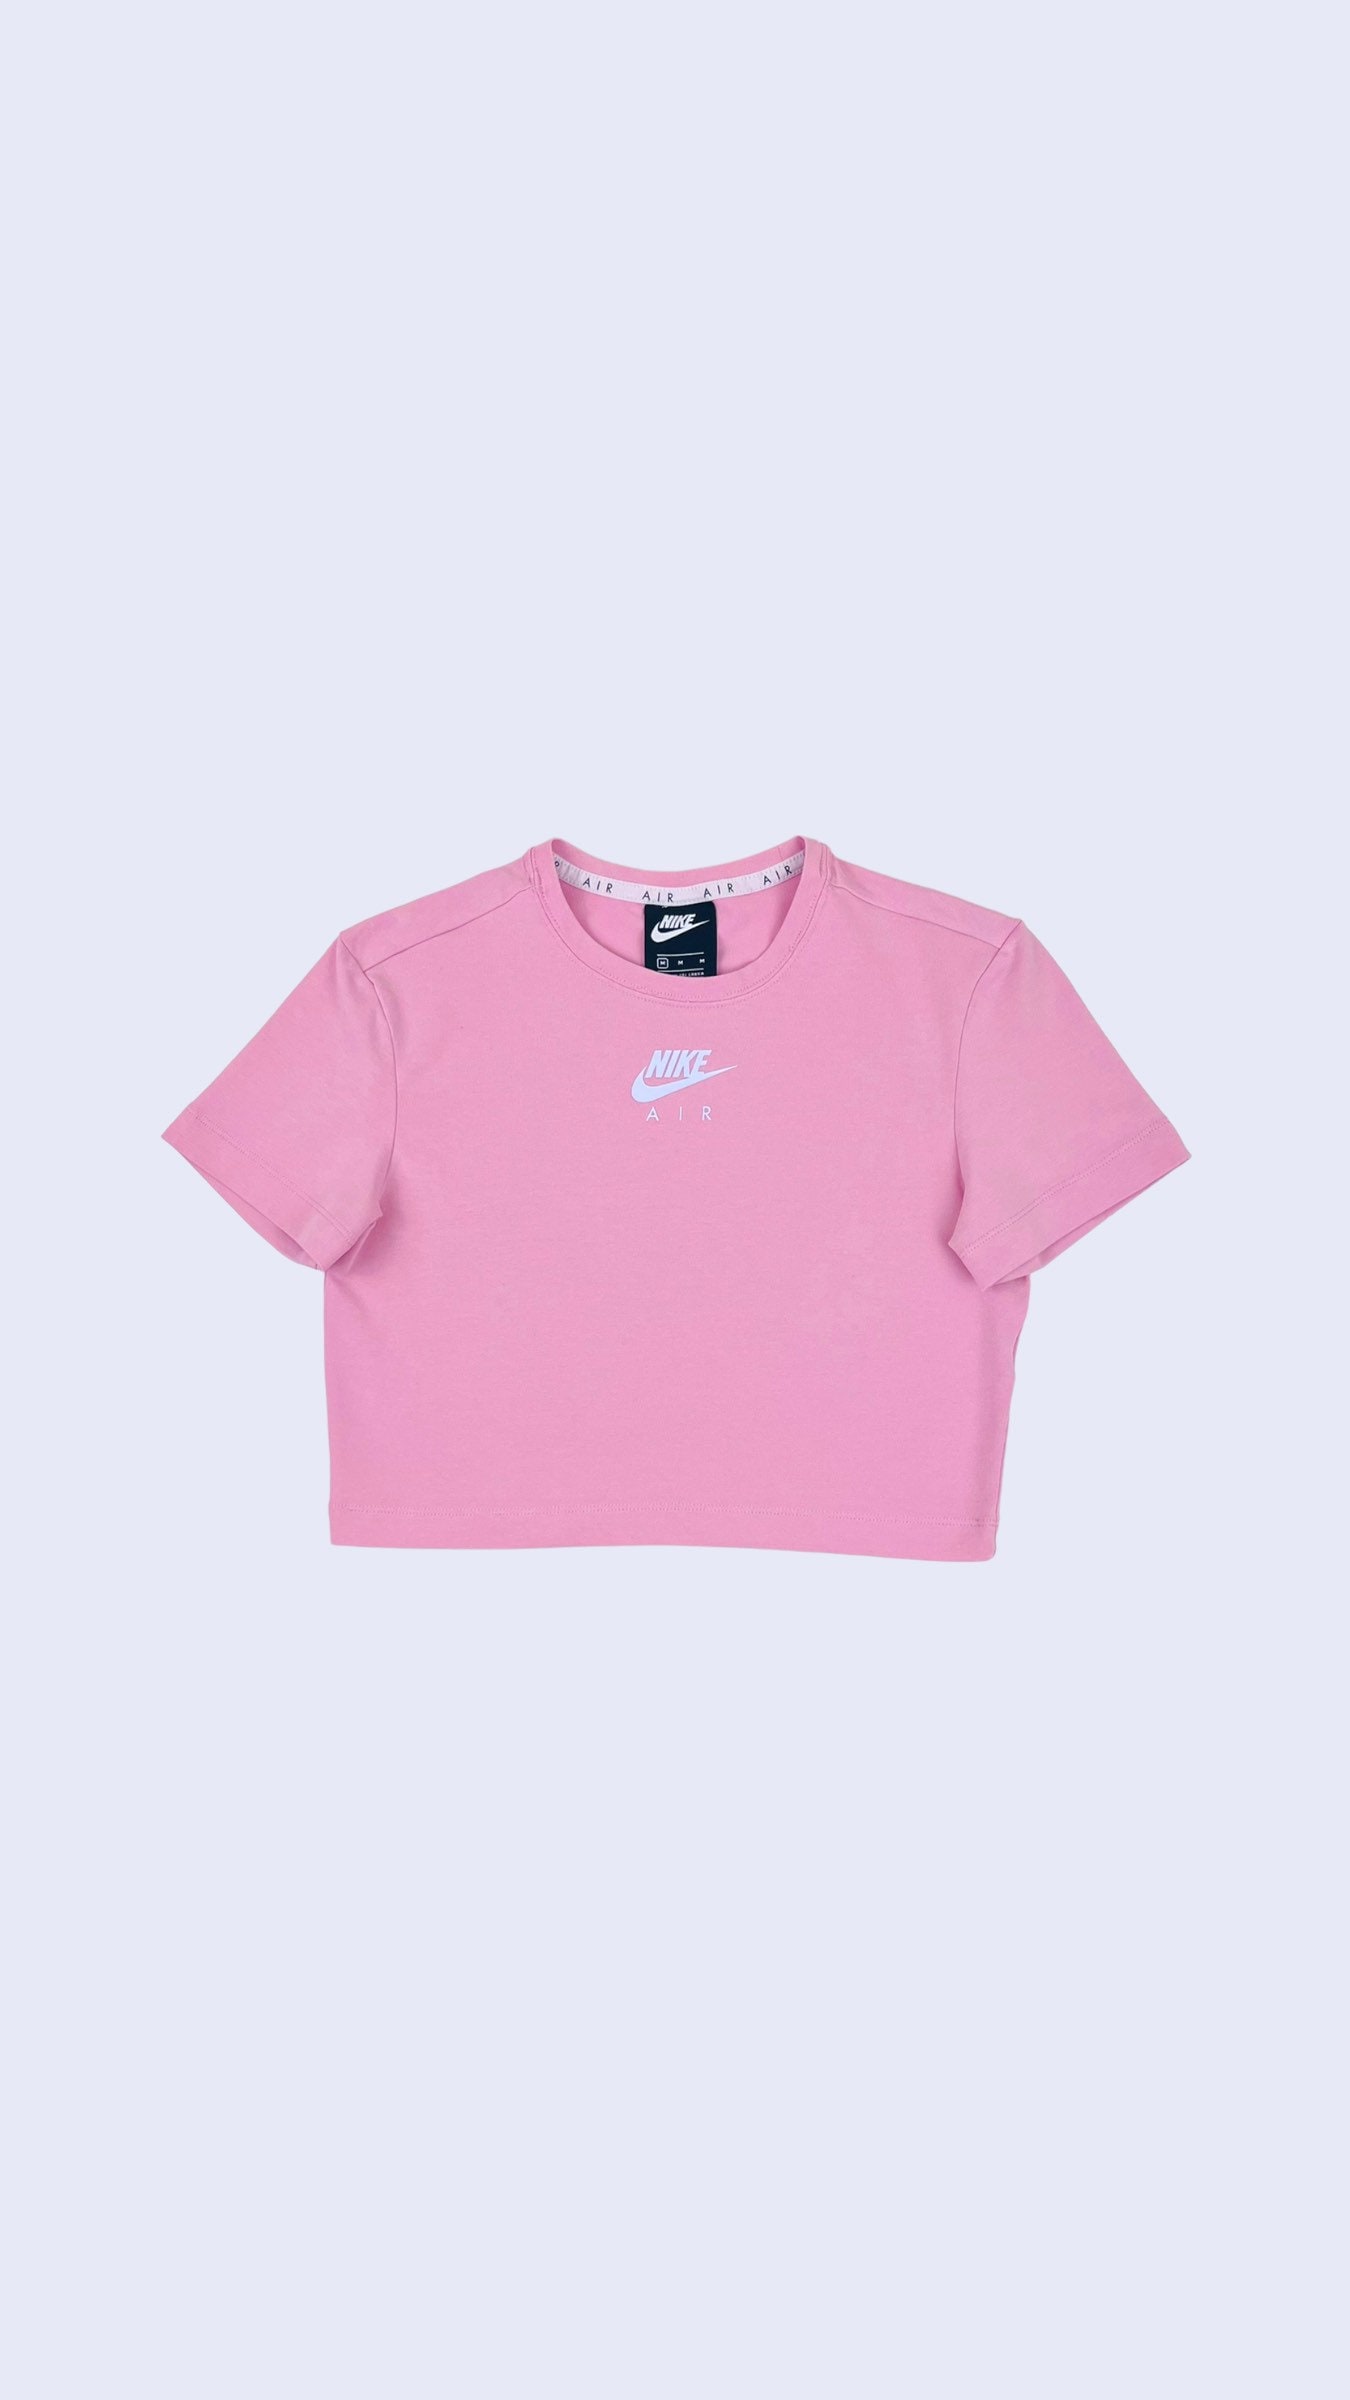 Buy Nike Air X Vintage Pink T-shirt Womens Pink Cropped Online in - Etsy